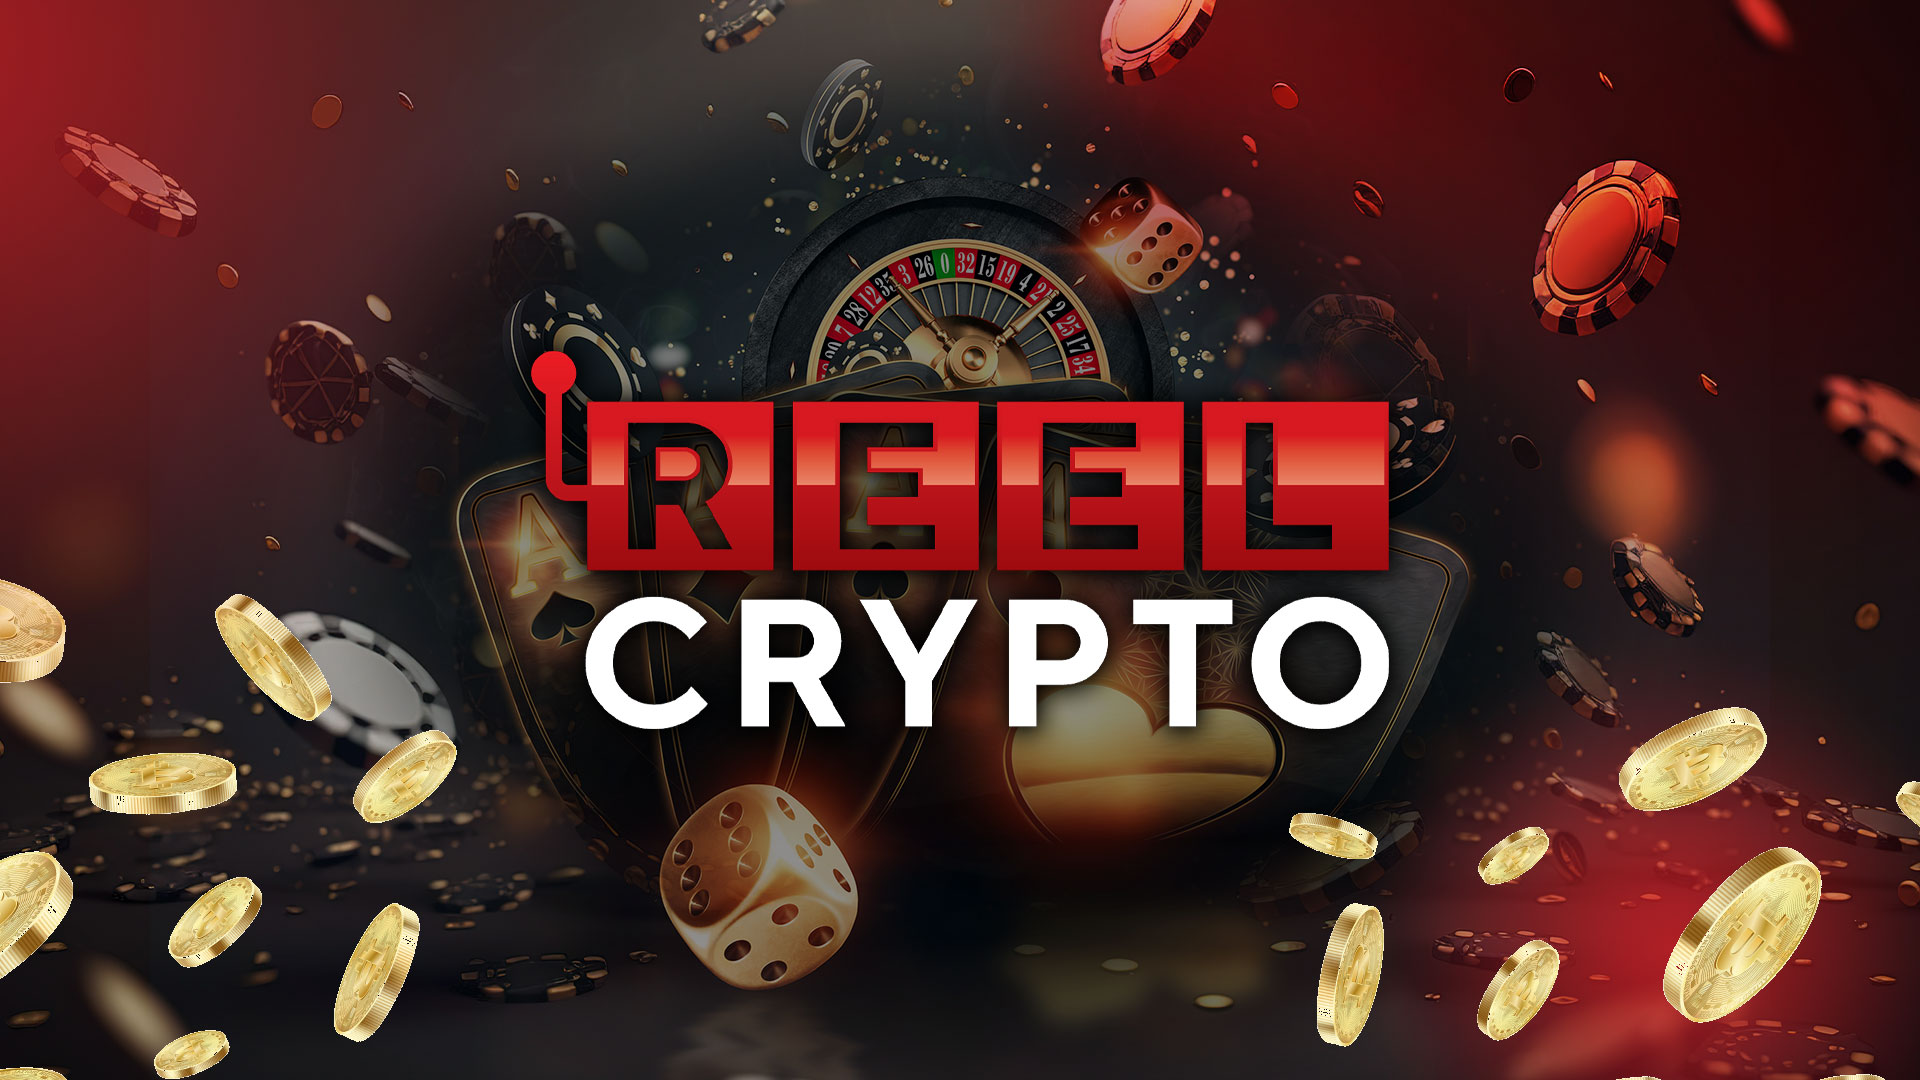 ReelCrypto: A Crypto Casino That Makes Everything Possible